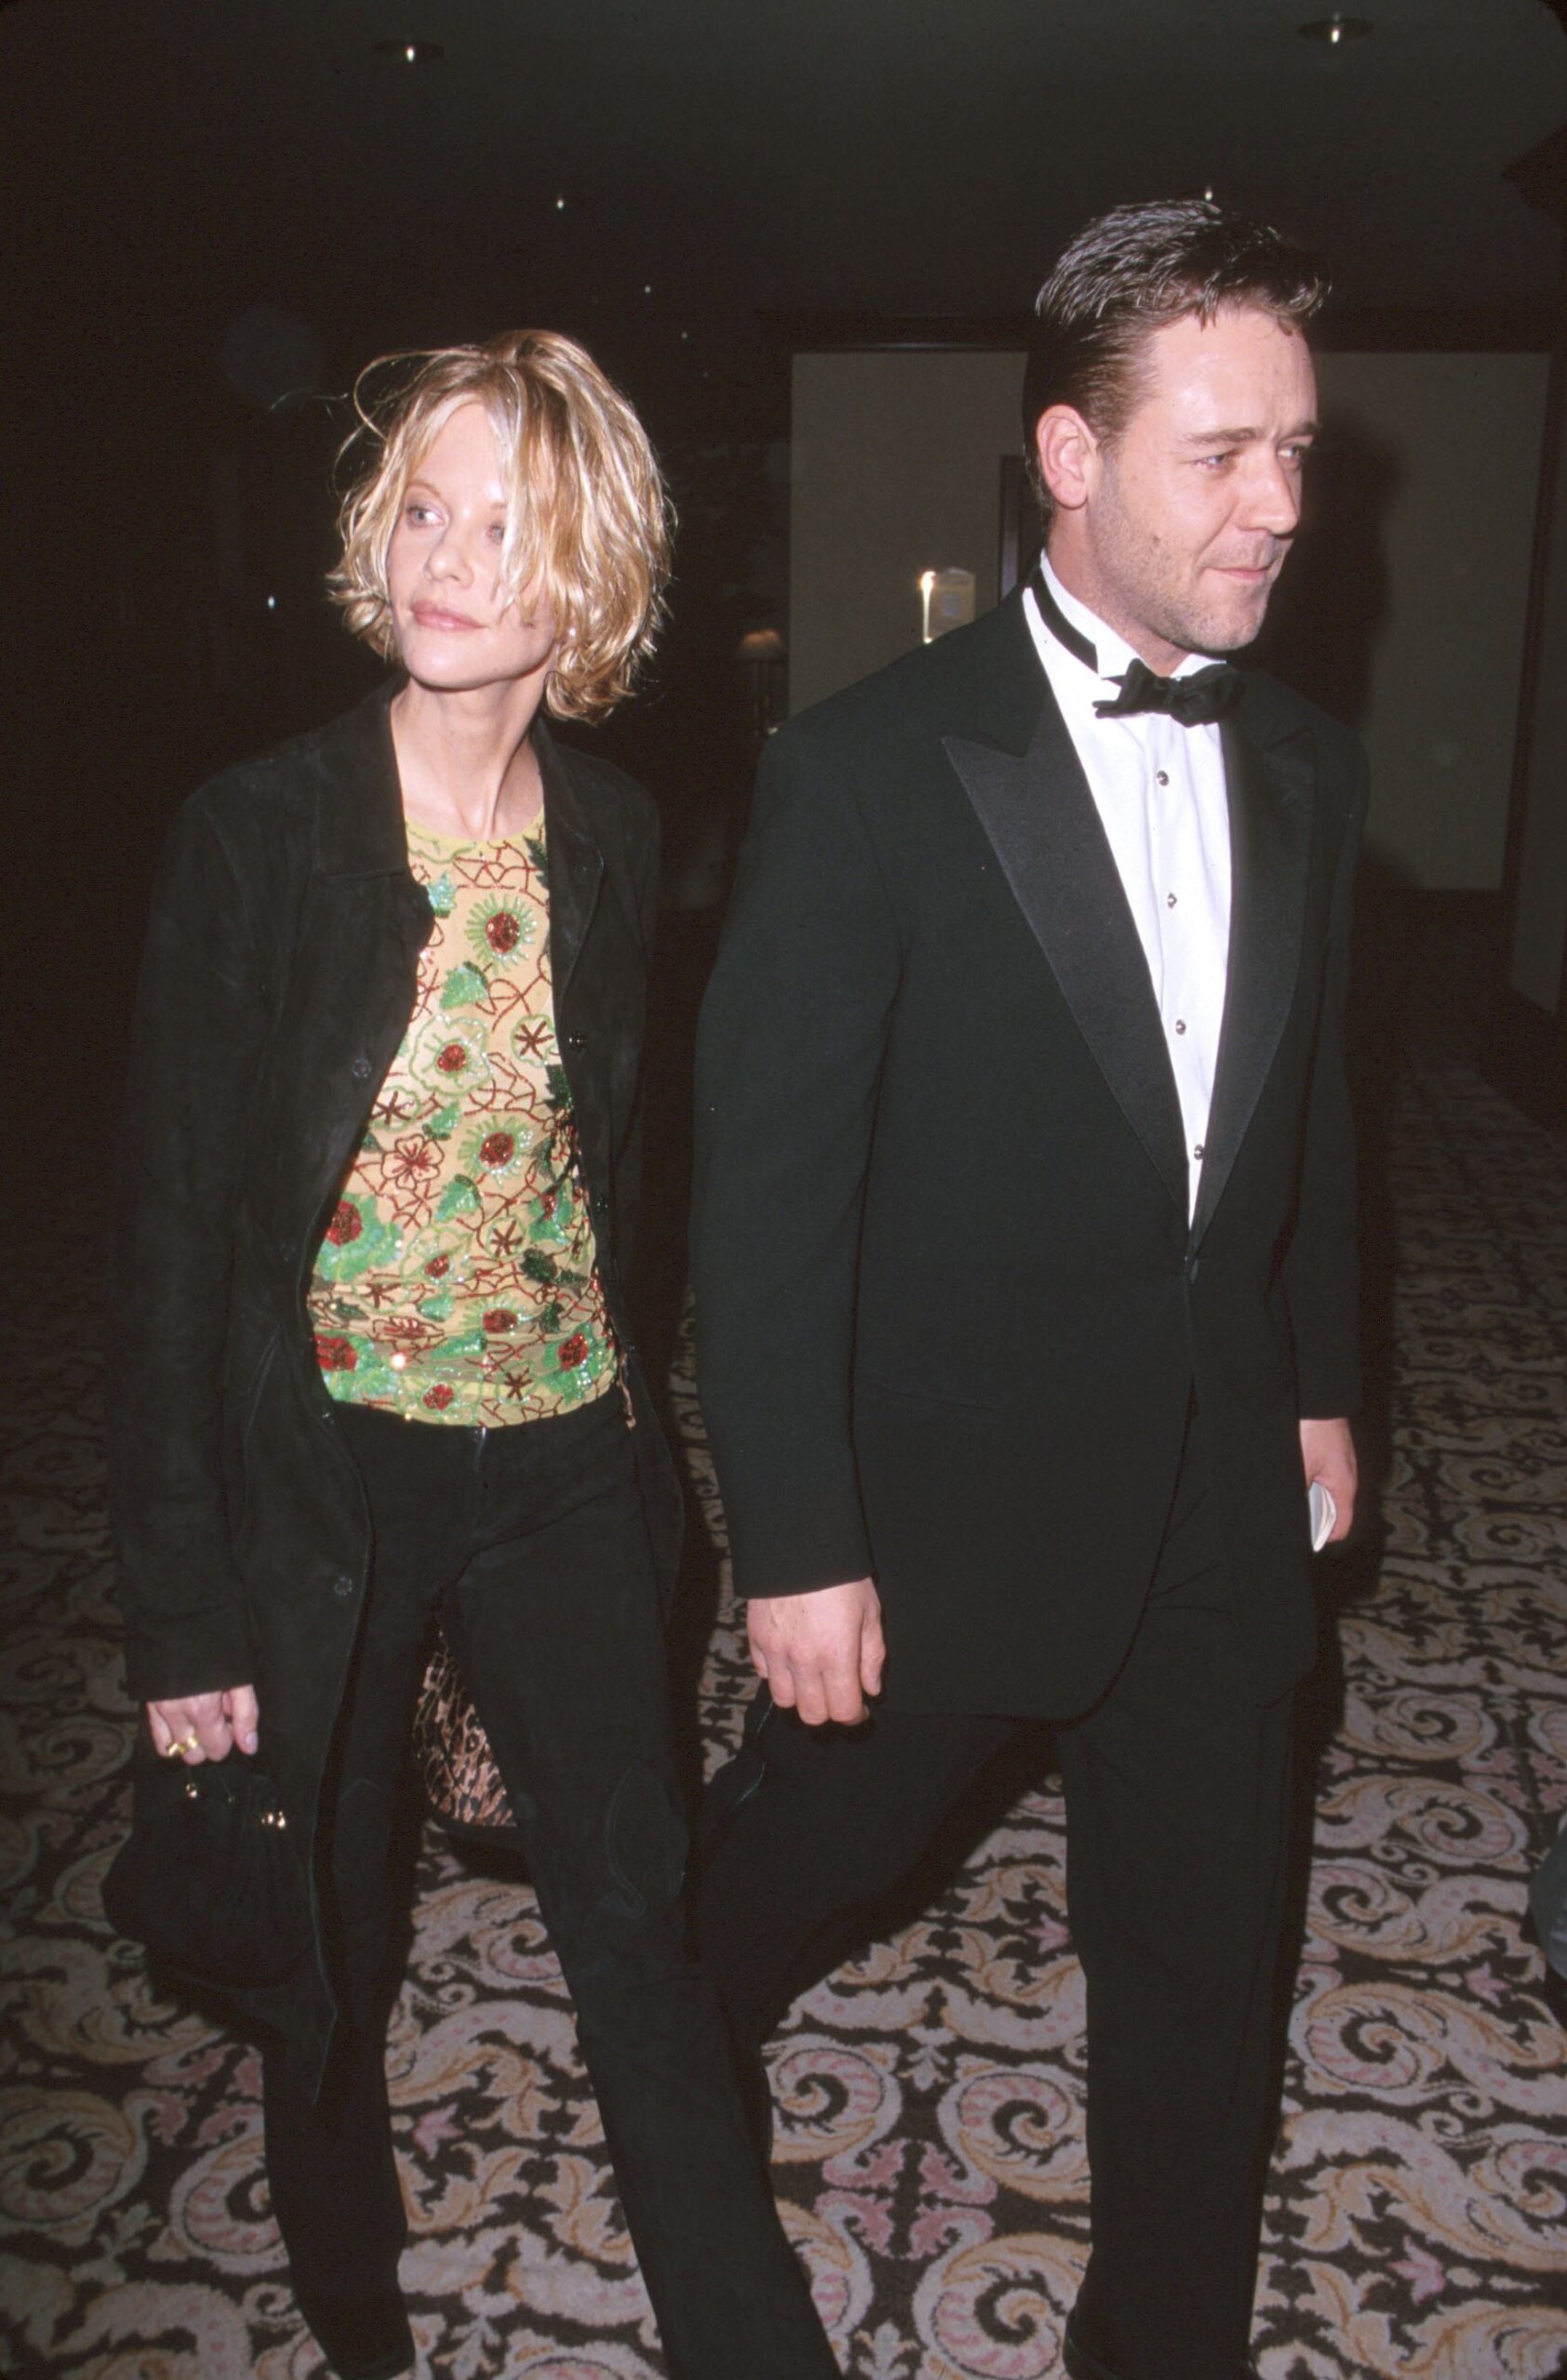 Meg Ryan and actor Russell Crowe pictured attend the 52nd Annual Directors Guild Awards at Century Plaza Hotel on March 11, 2000 Century City, California | Source: Getty Images